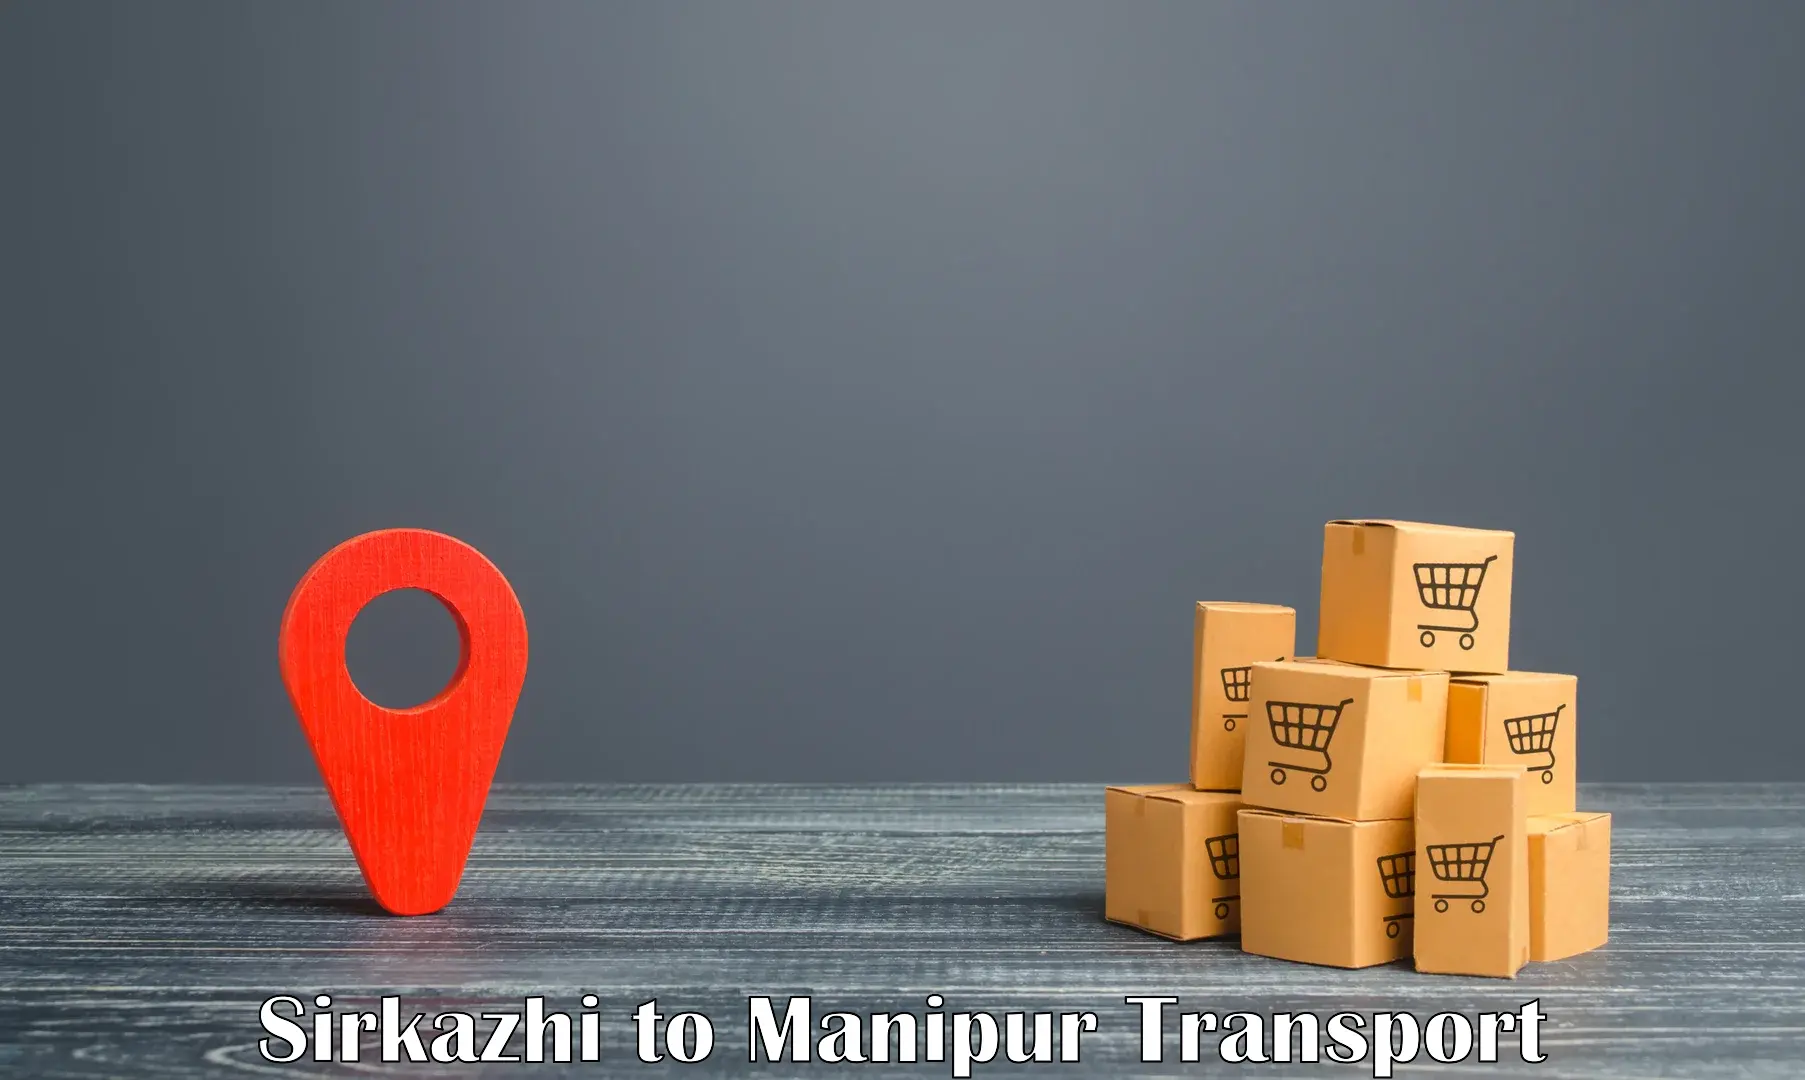 Transport bike from one state to another Sirkazhi to Manipur